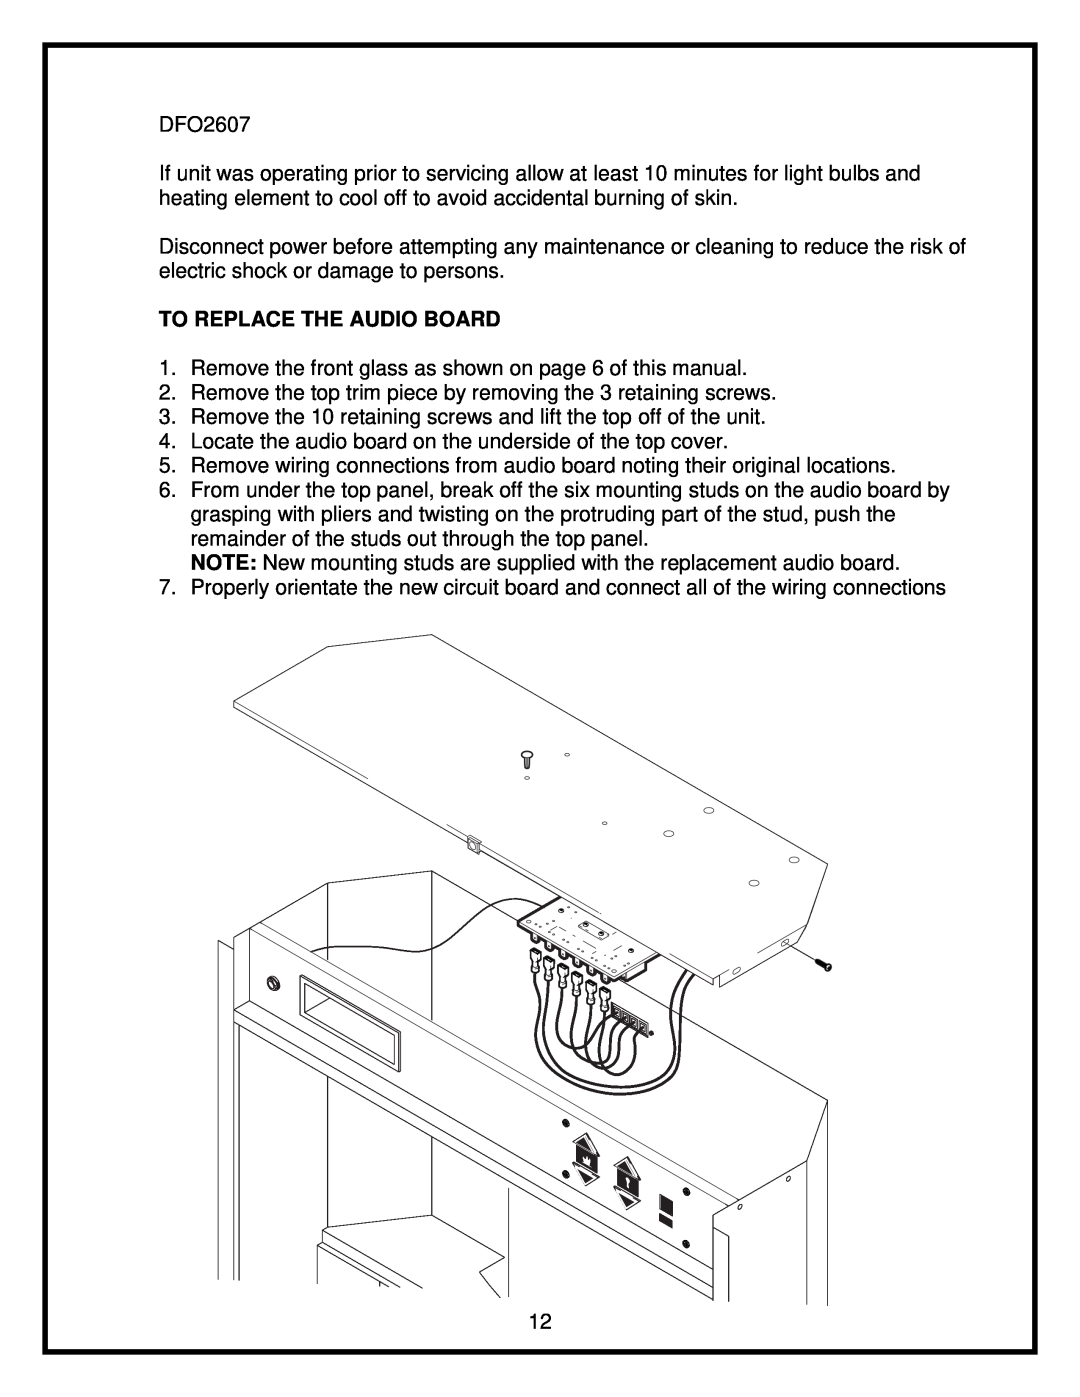 Dimplex 26 service manual To Replace The Audio Board 